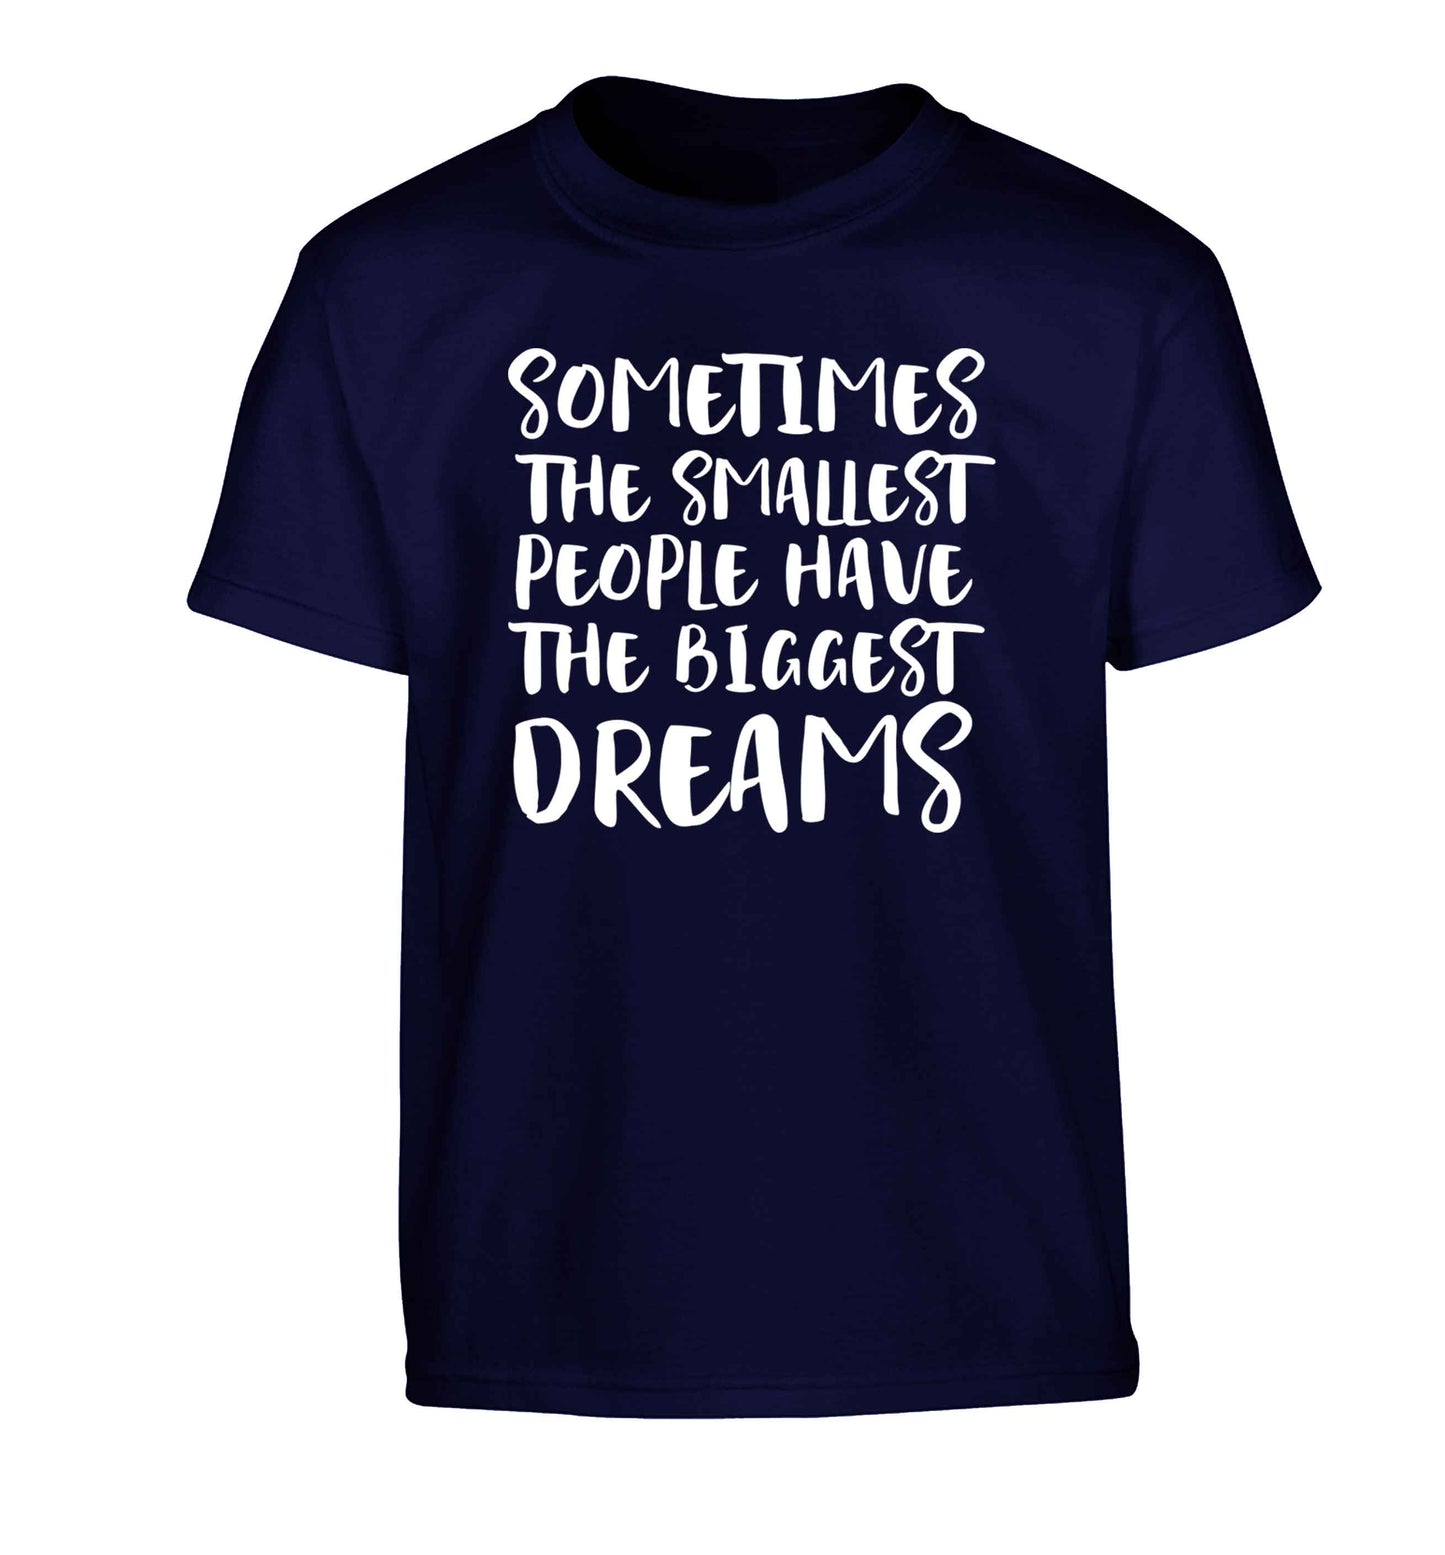 Sometimes the smallest people have the biggest dreams Children's navy Tshirt 12-13 Years